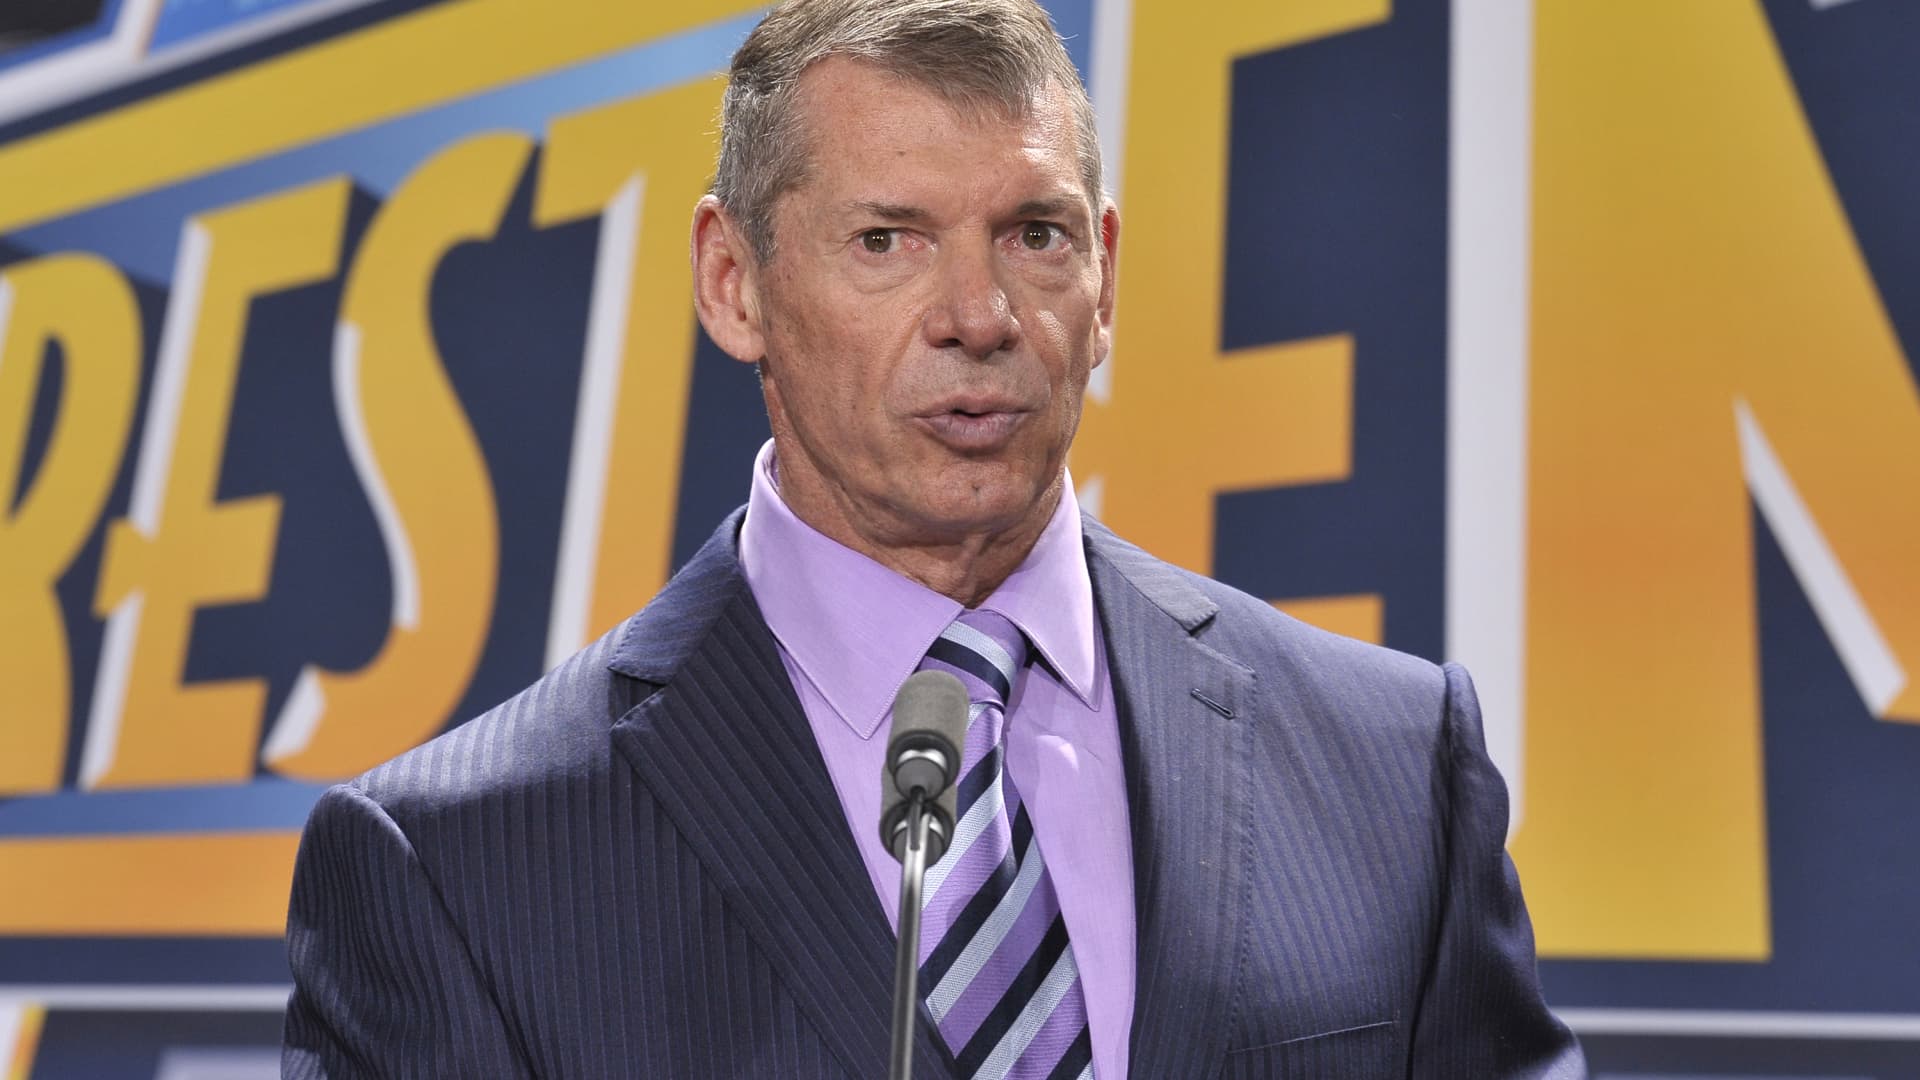 Vince McMahon open to leaving WWE for good if he sells the company, CEO Nick Khan says